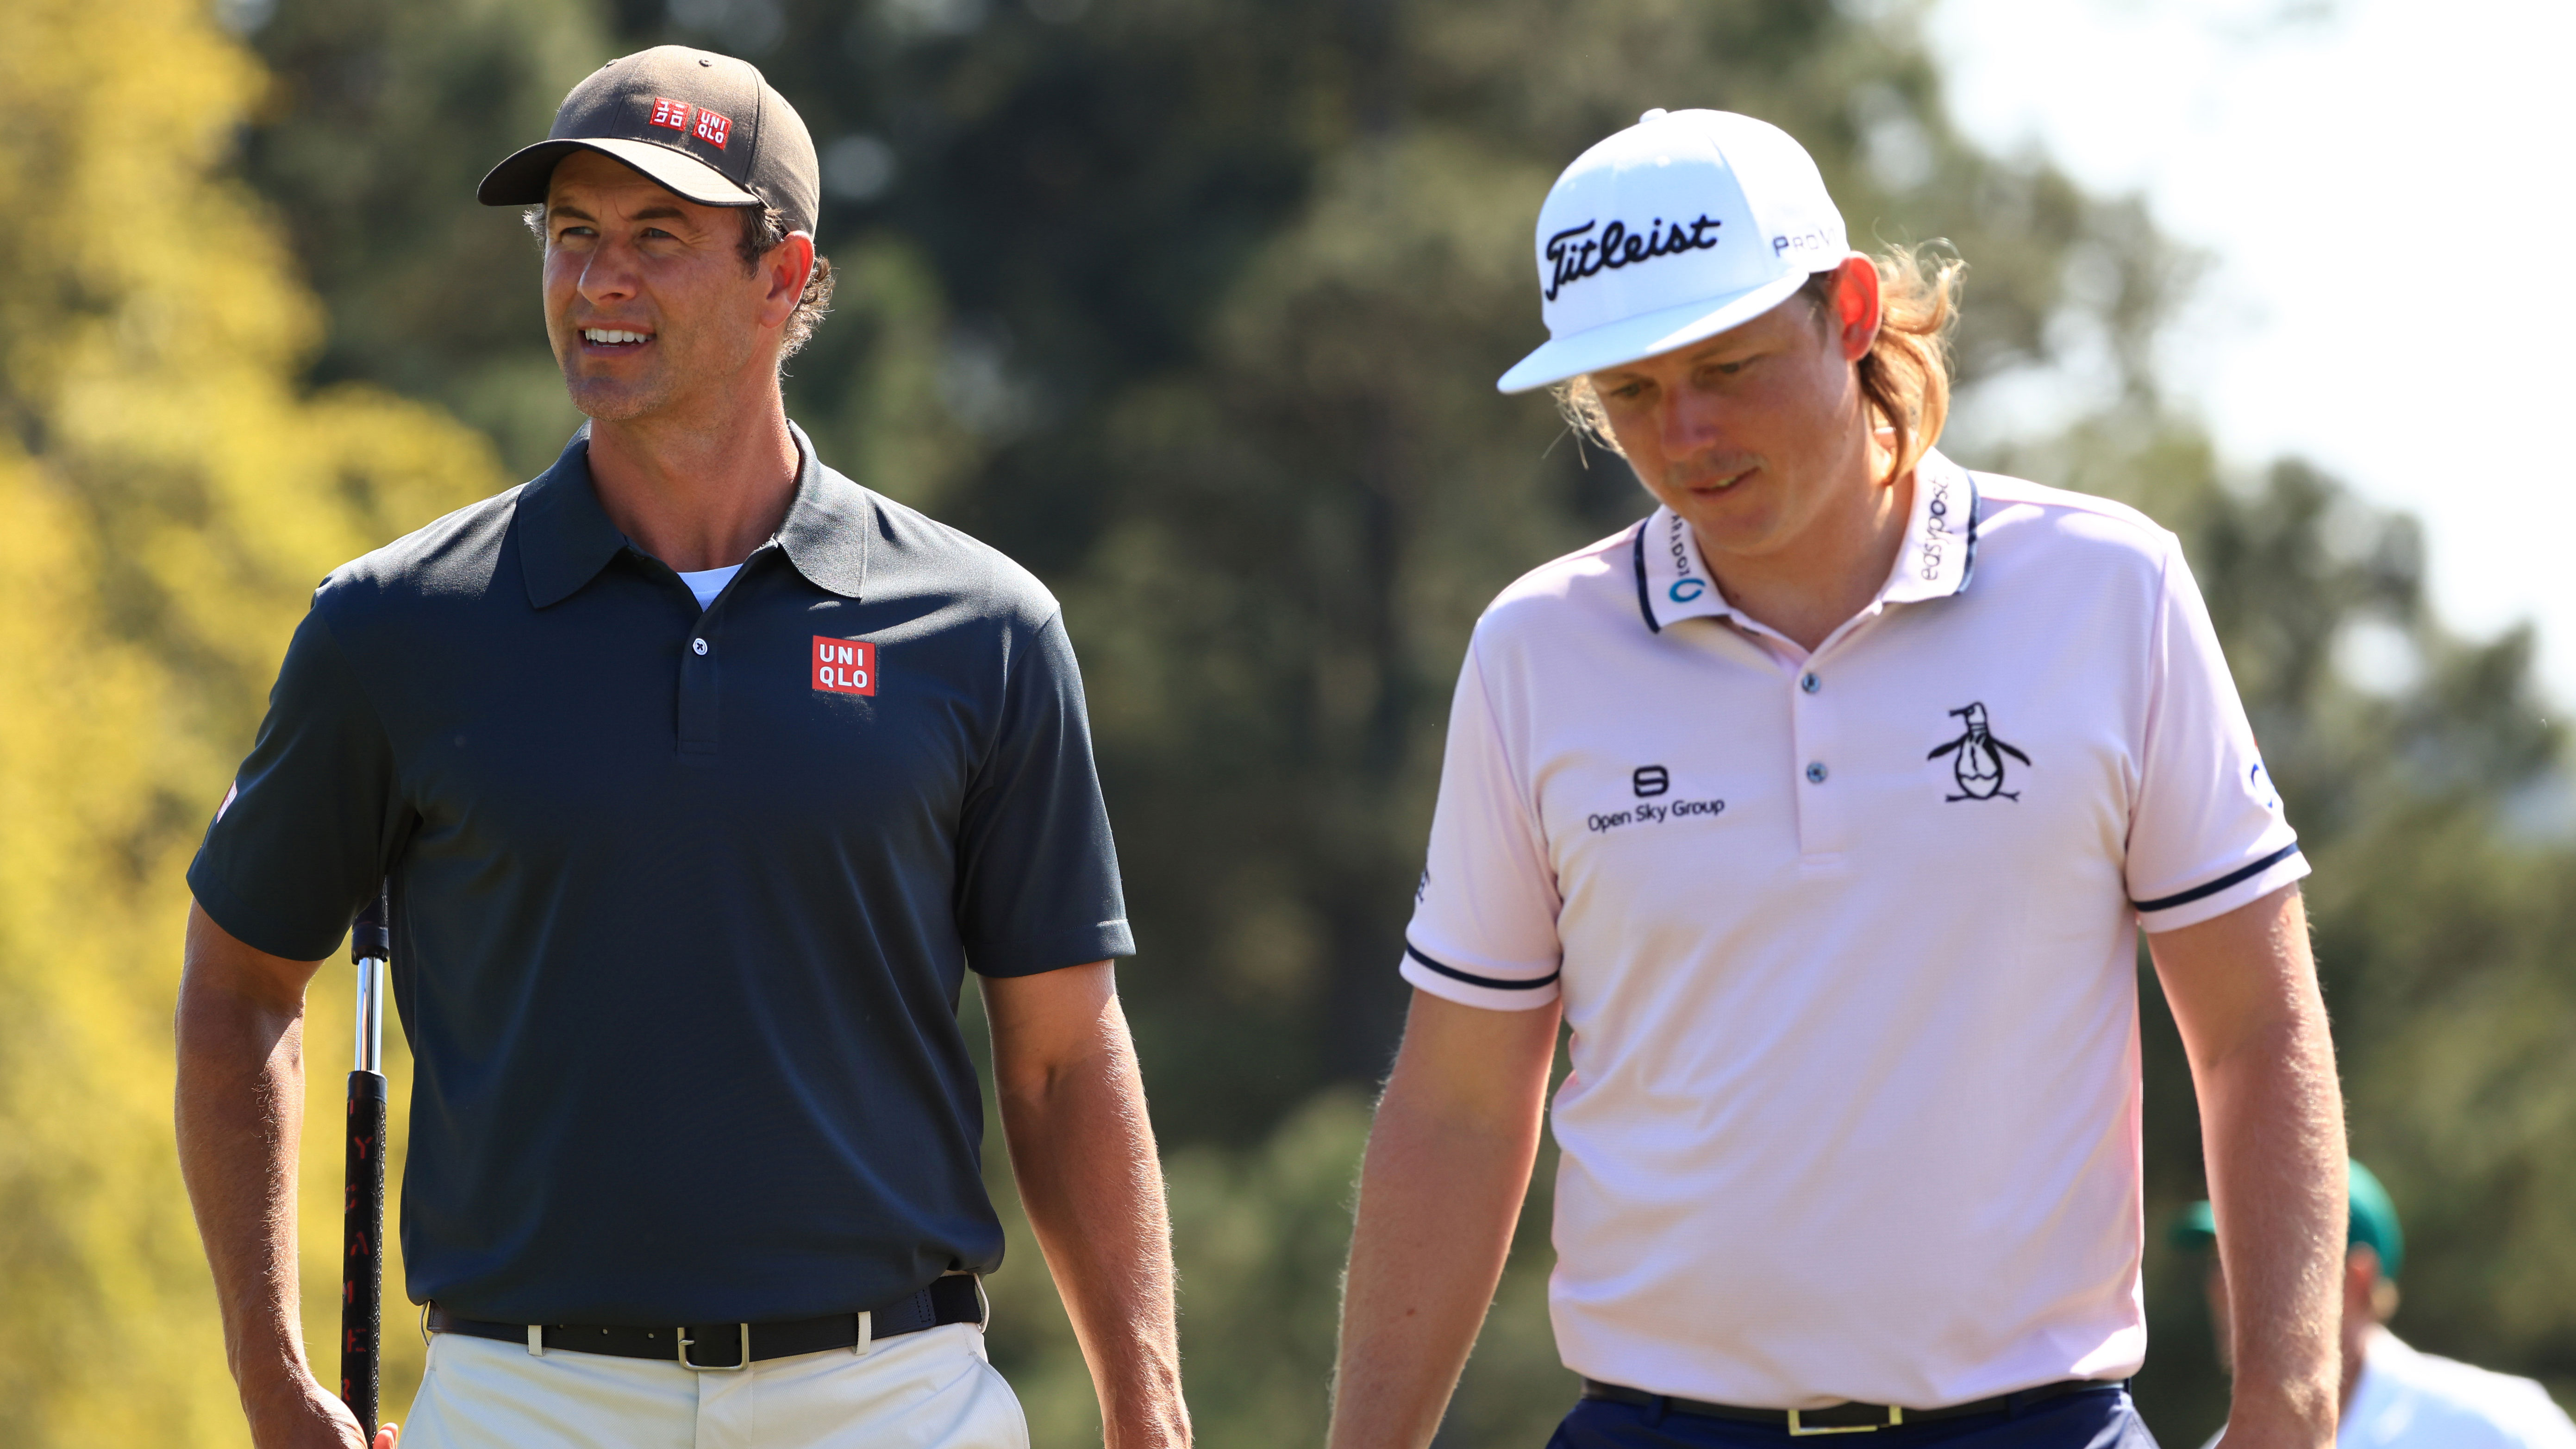 Trolley ansvar Grund Masters 2021 Ultimate Guide: Date, tee times, pairings, odds, how to watch  in Australia and everything else you need to know